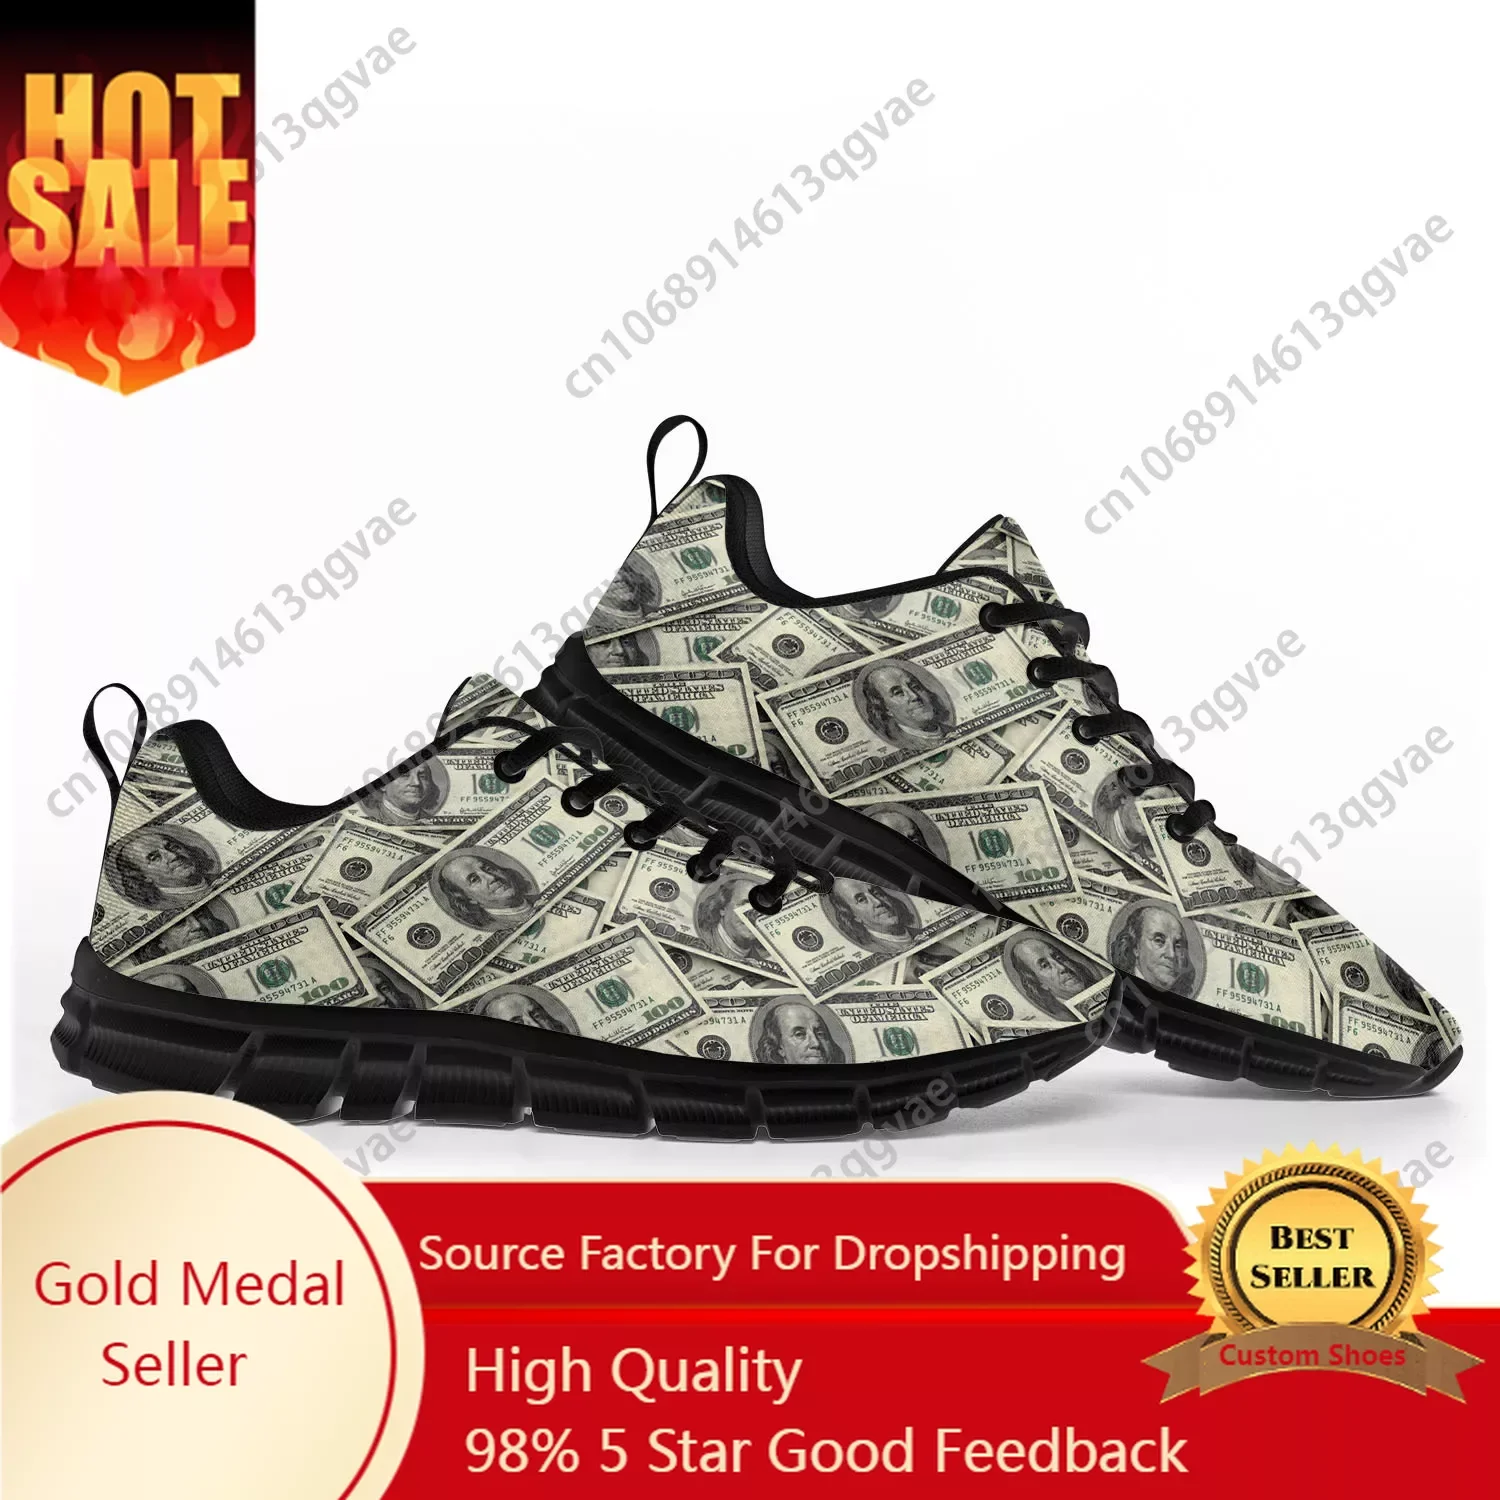 Dollar Printed Popular Sports Shoes Mens Womens Teenager Kids Children Sneakers Casual Custom High Quality Couple Shoes Black 2021 fashion style couple wears nas illmatic printed hoodies loose casual clothing high quality popular cotton trend streetwears